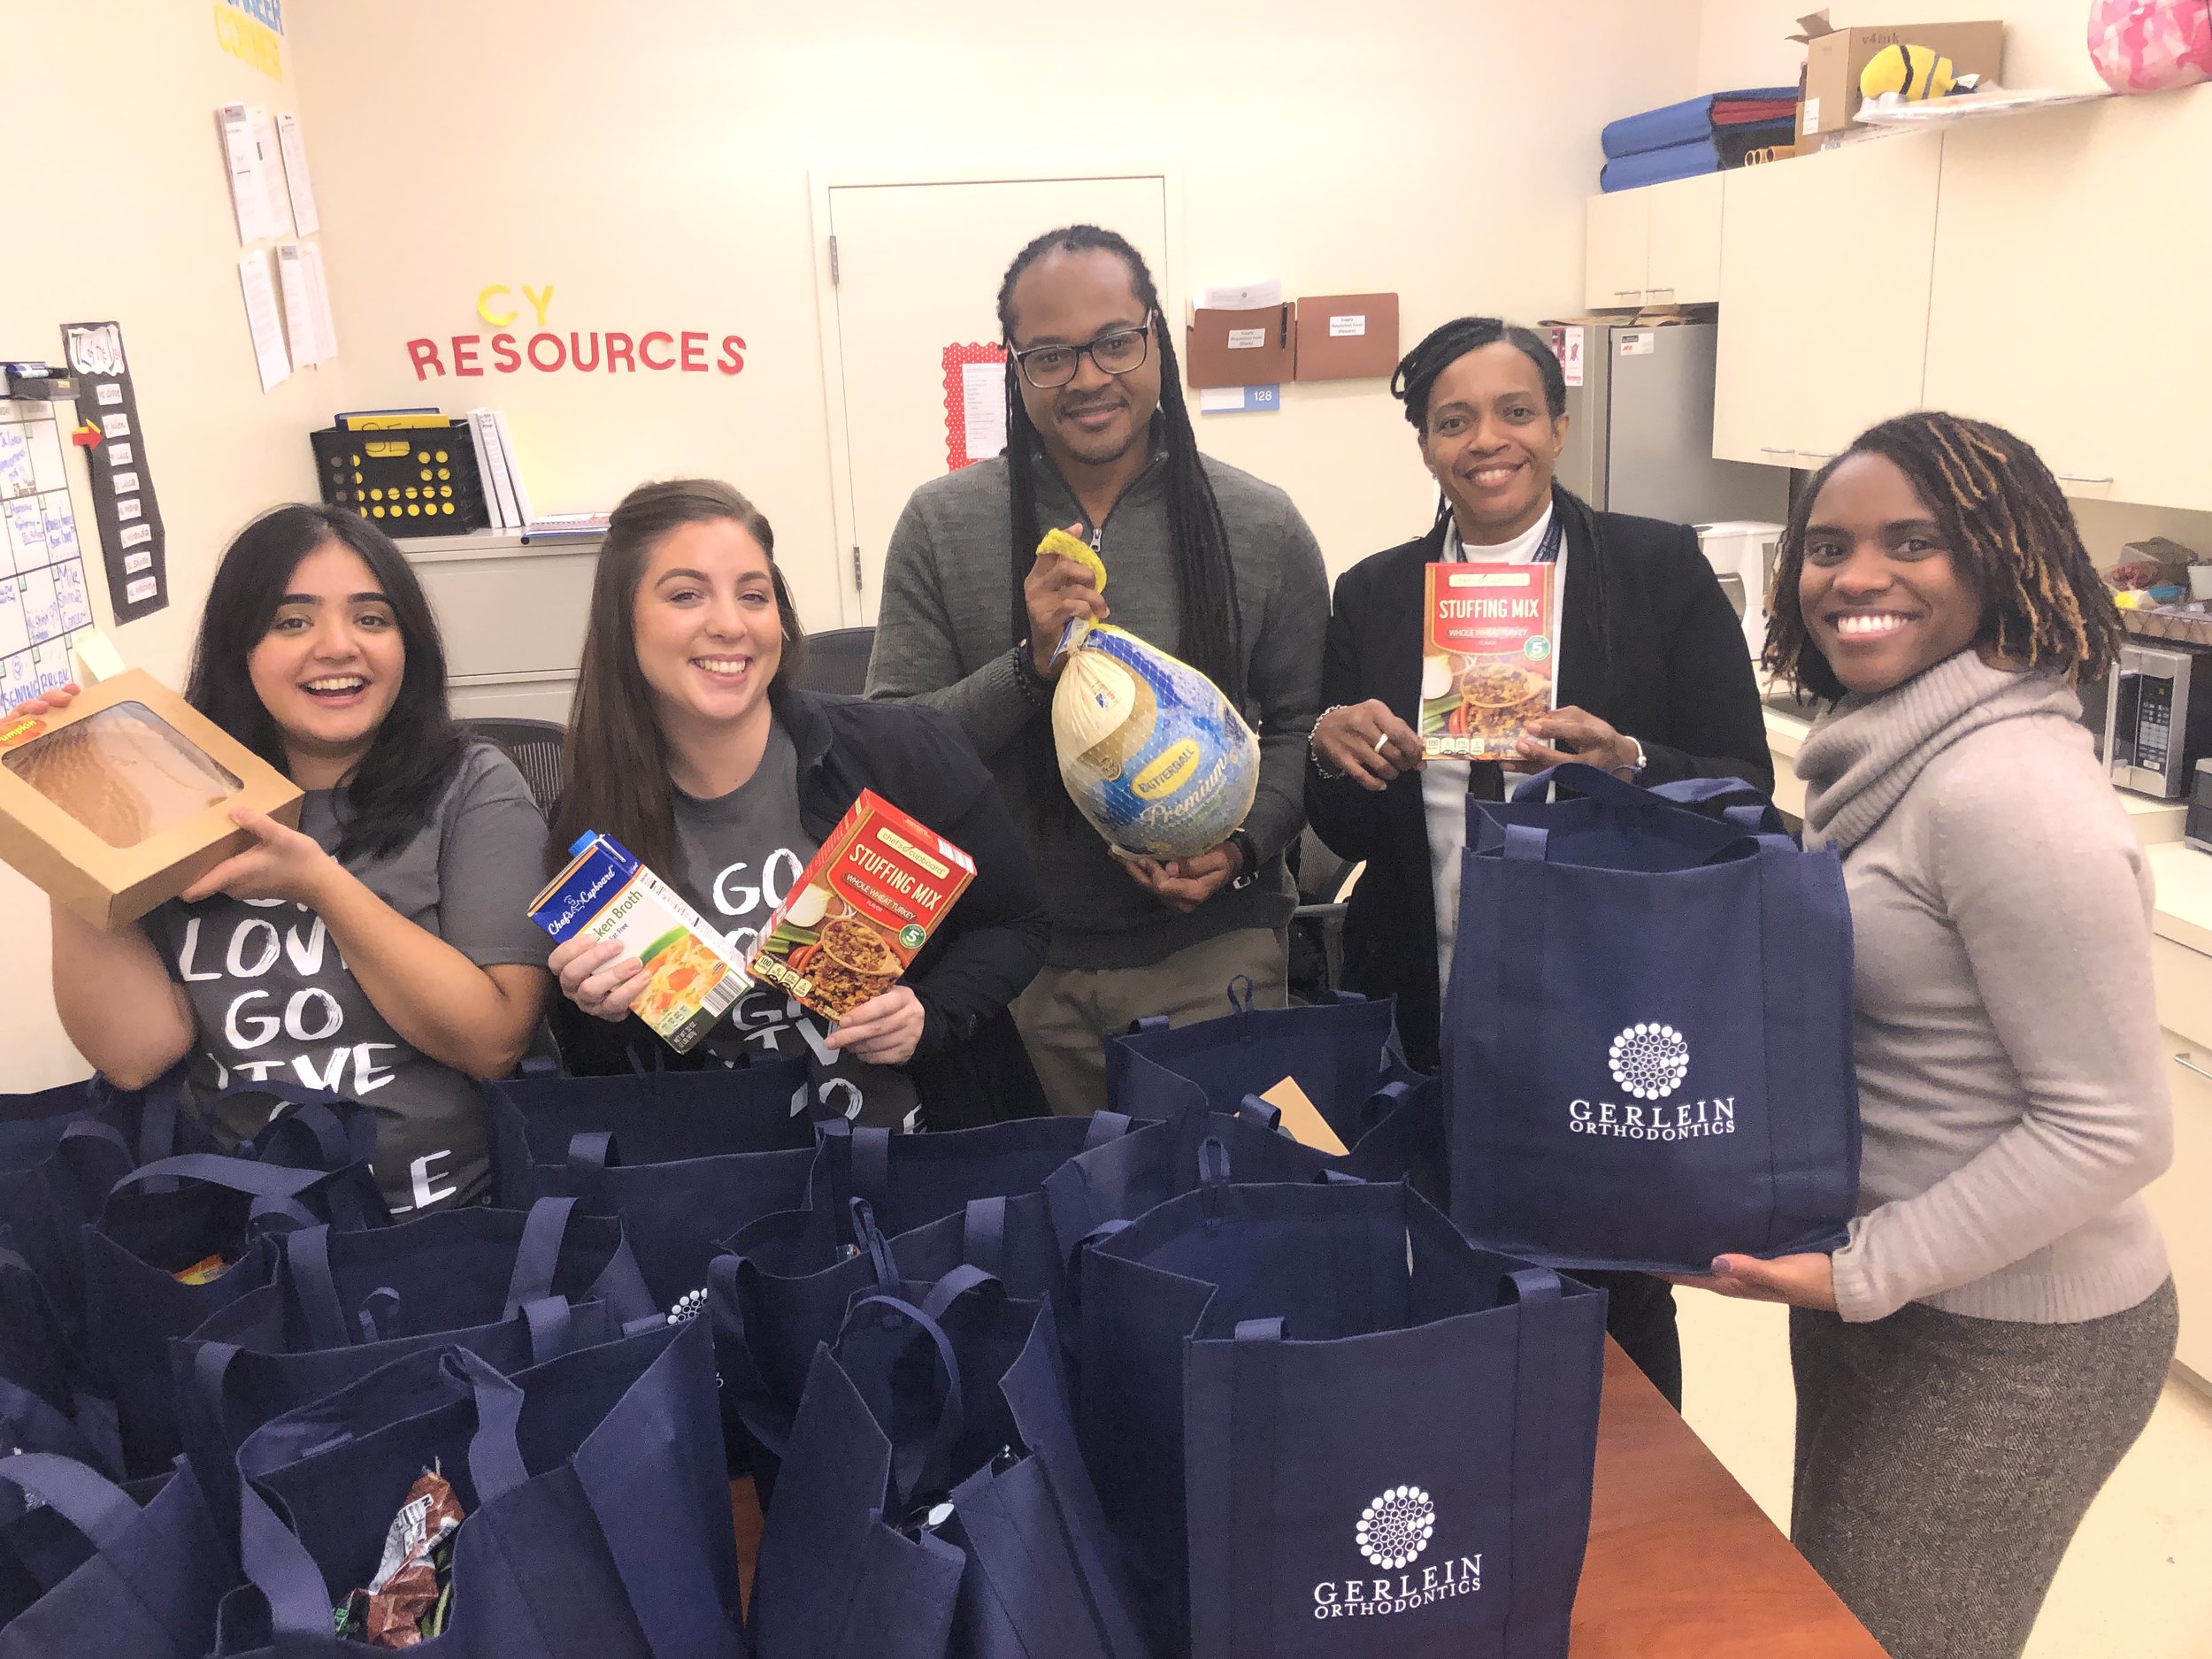 Gerlein staff members stand smiling with members of a donation center. Everyone is holding thanksgiving food items and Gerlein bags.